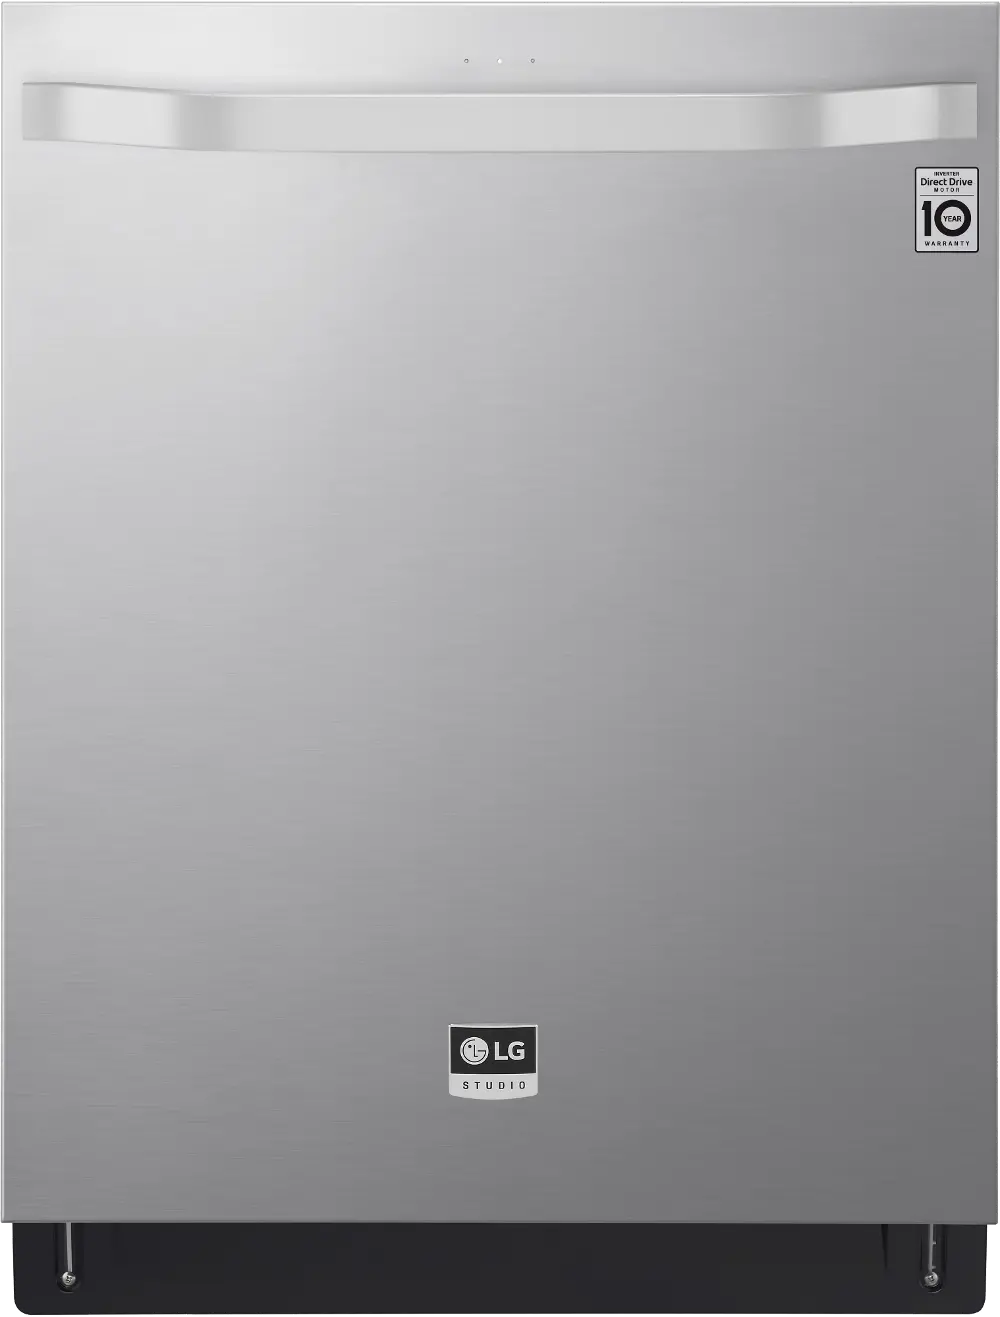 LSDT9908SS LG Studio Top Control Dishwasher - Stainless Steel-1